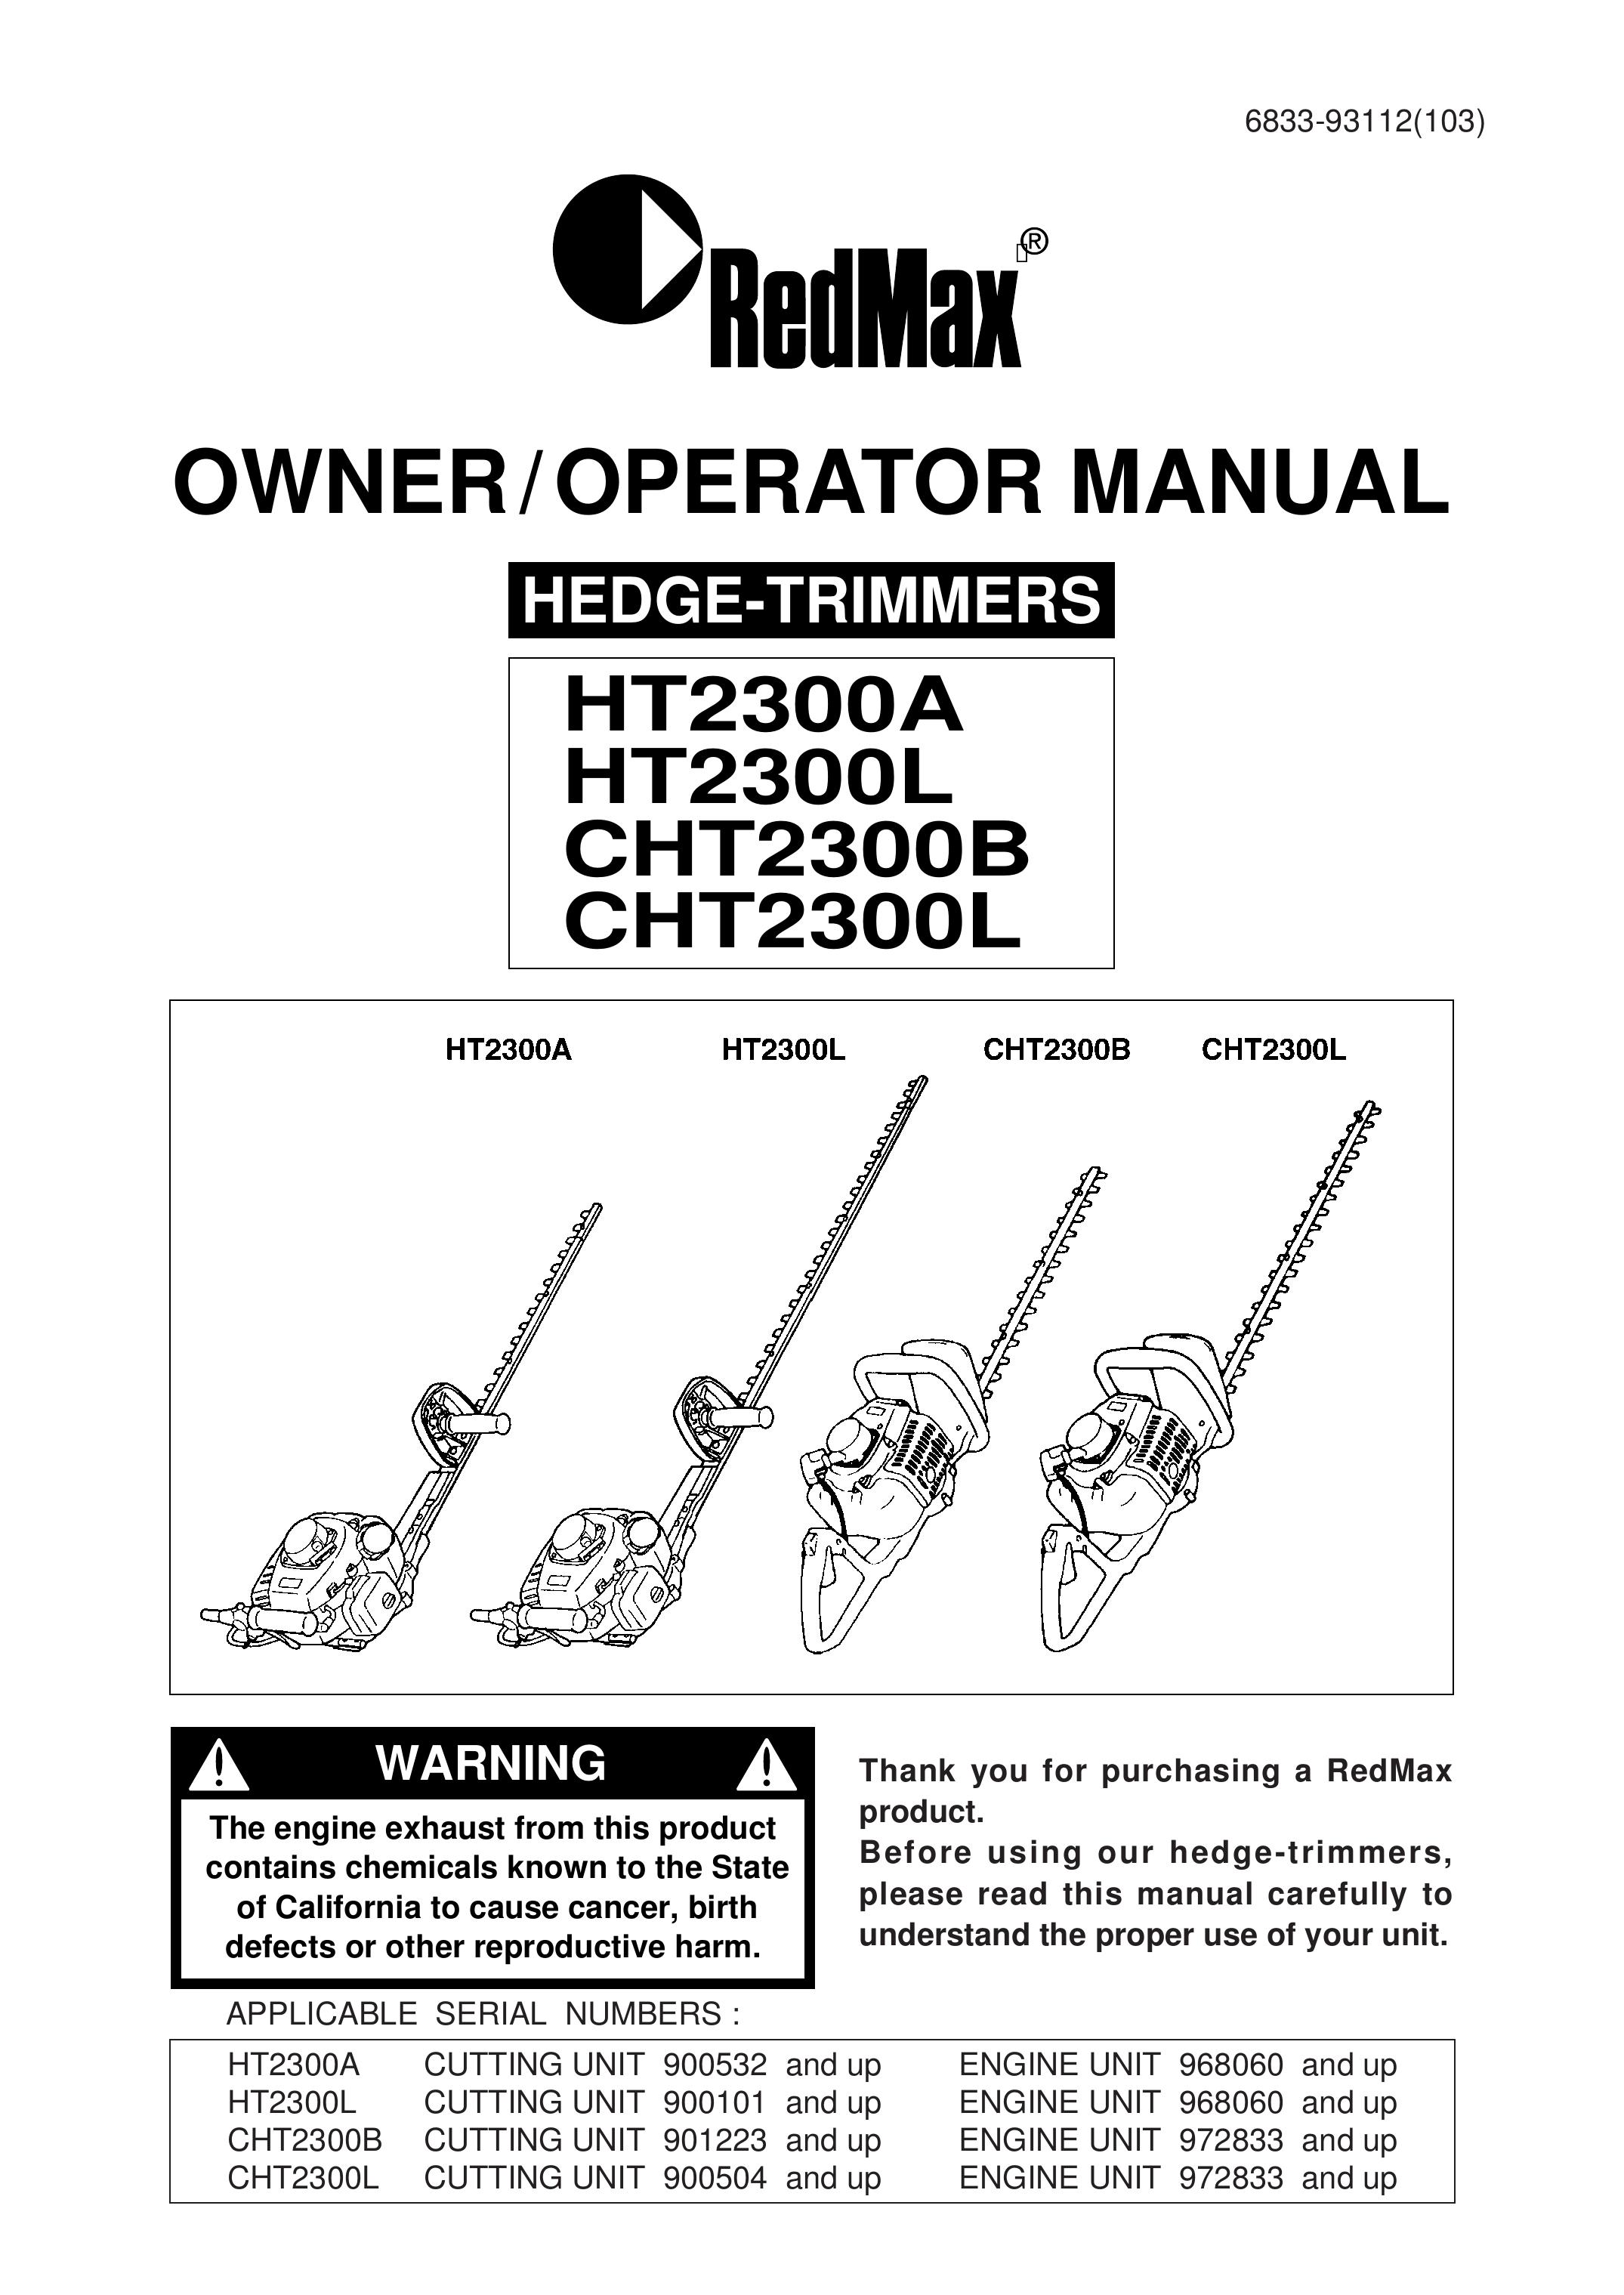 RedMax HT2300A Trimmer User Manual